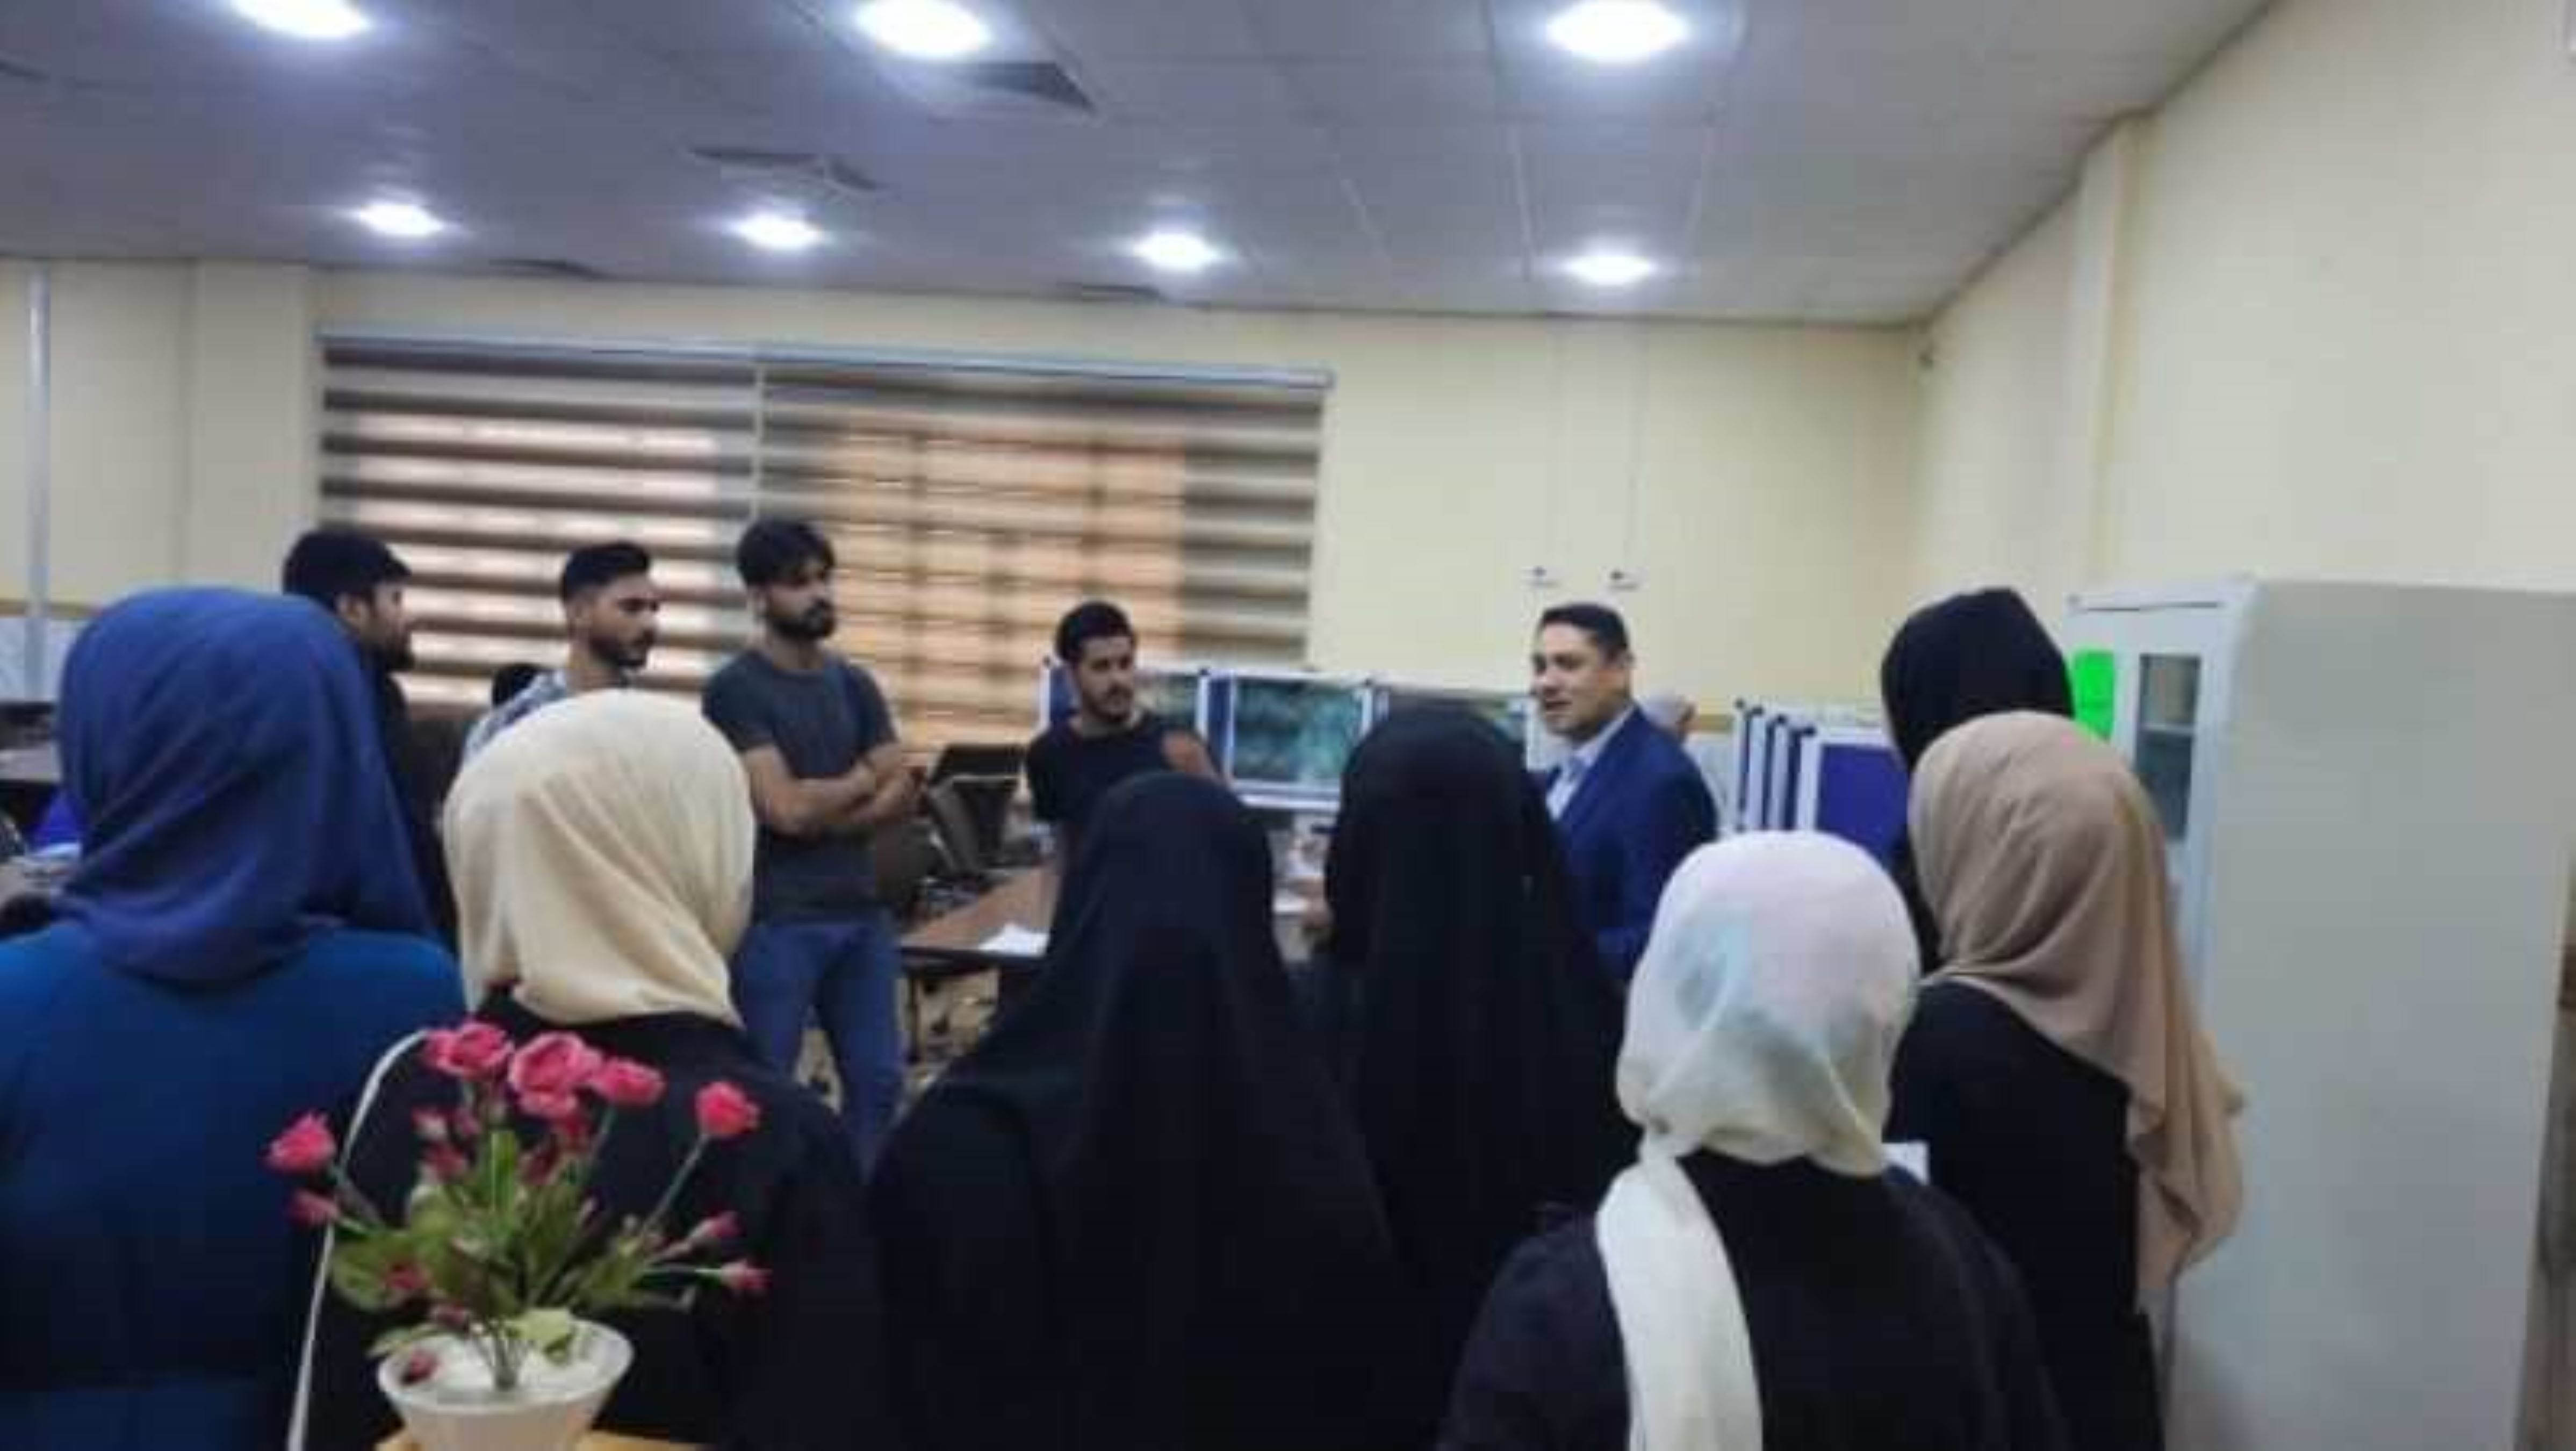 Students of the Department of Mathematics, College of Science, visit the Central Library